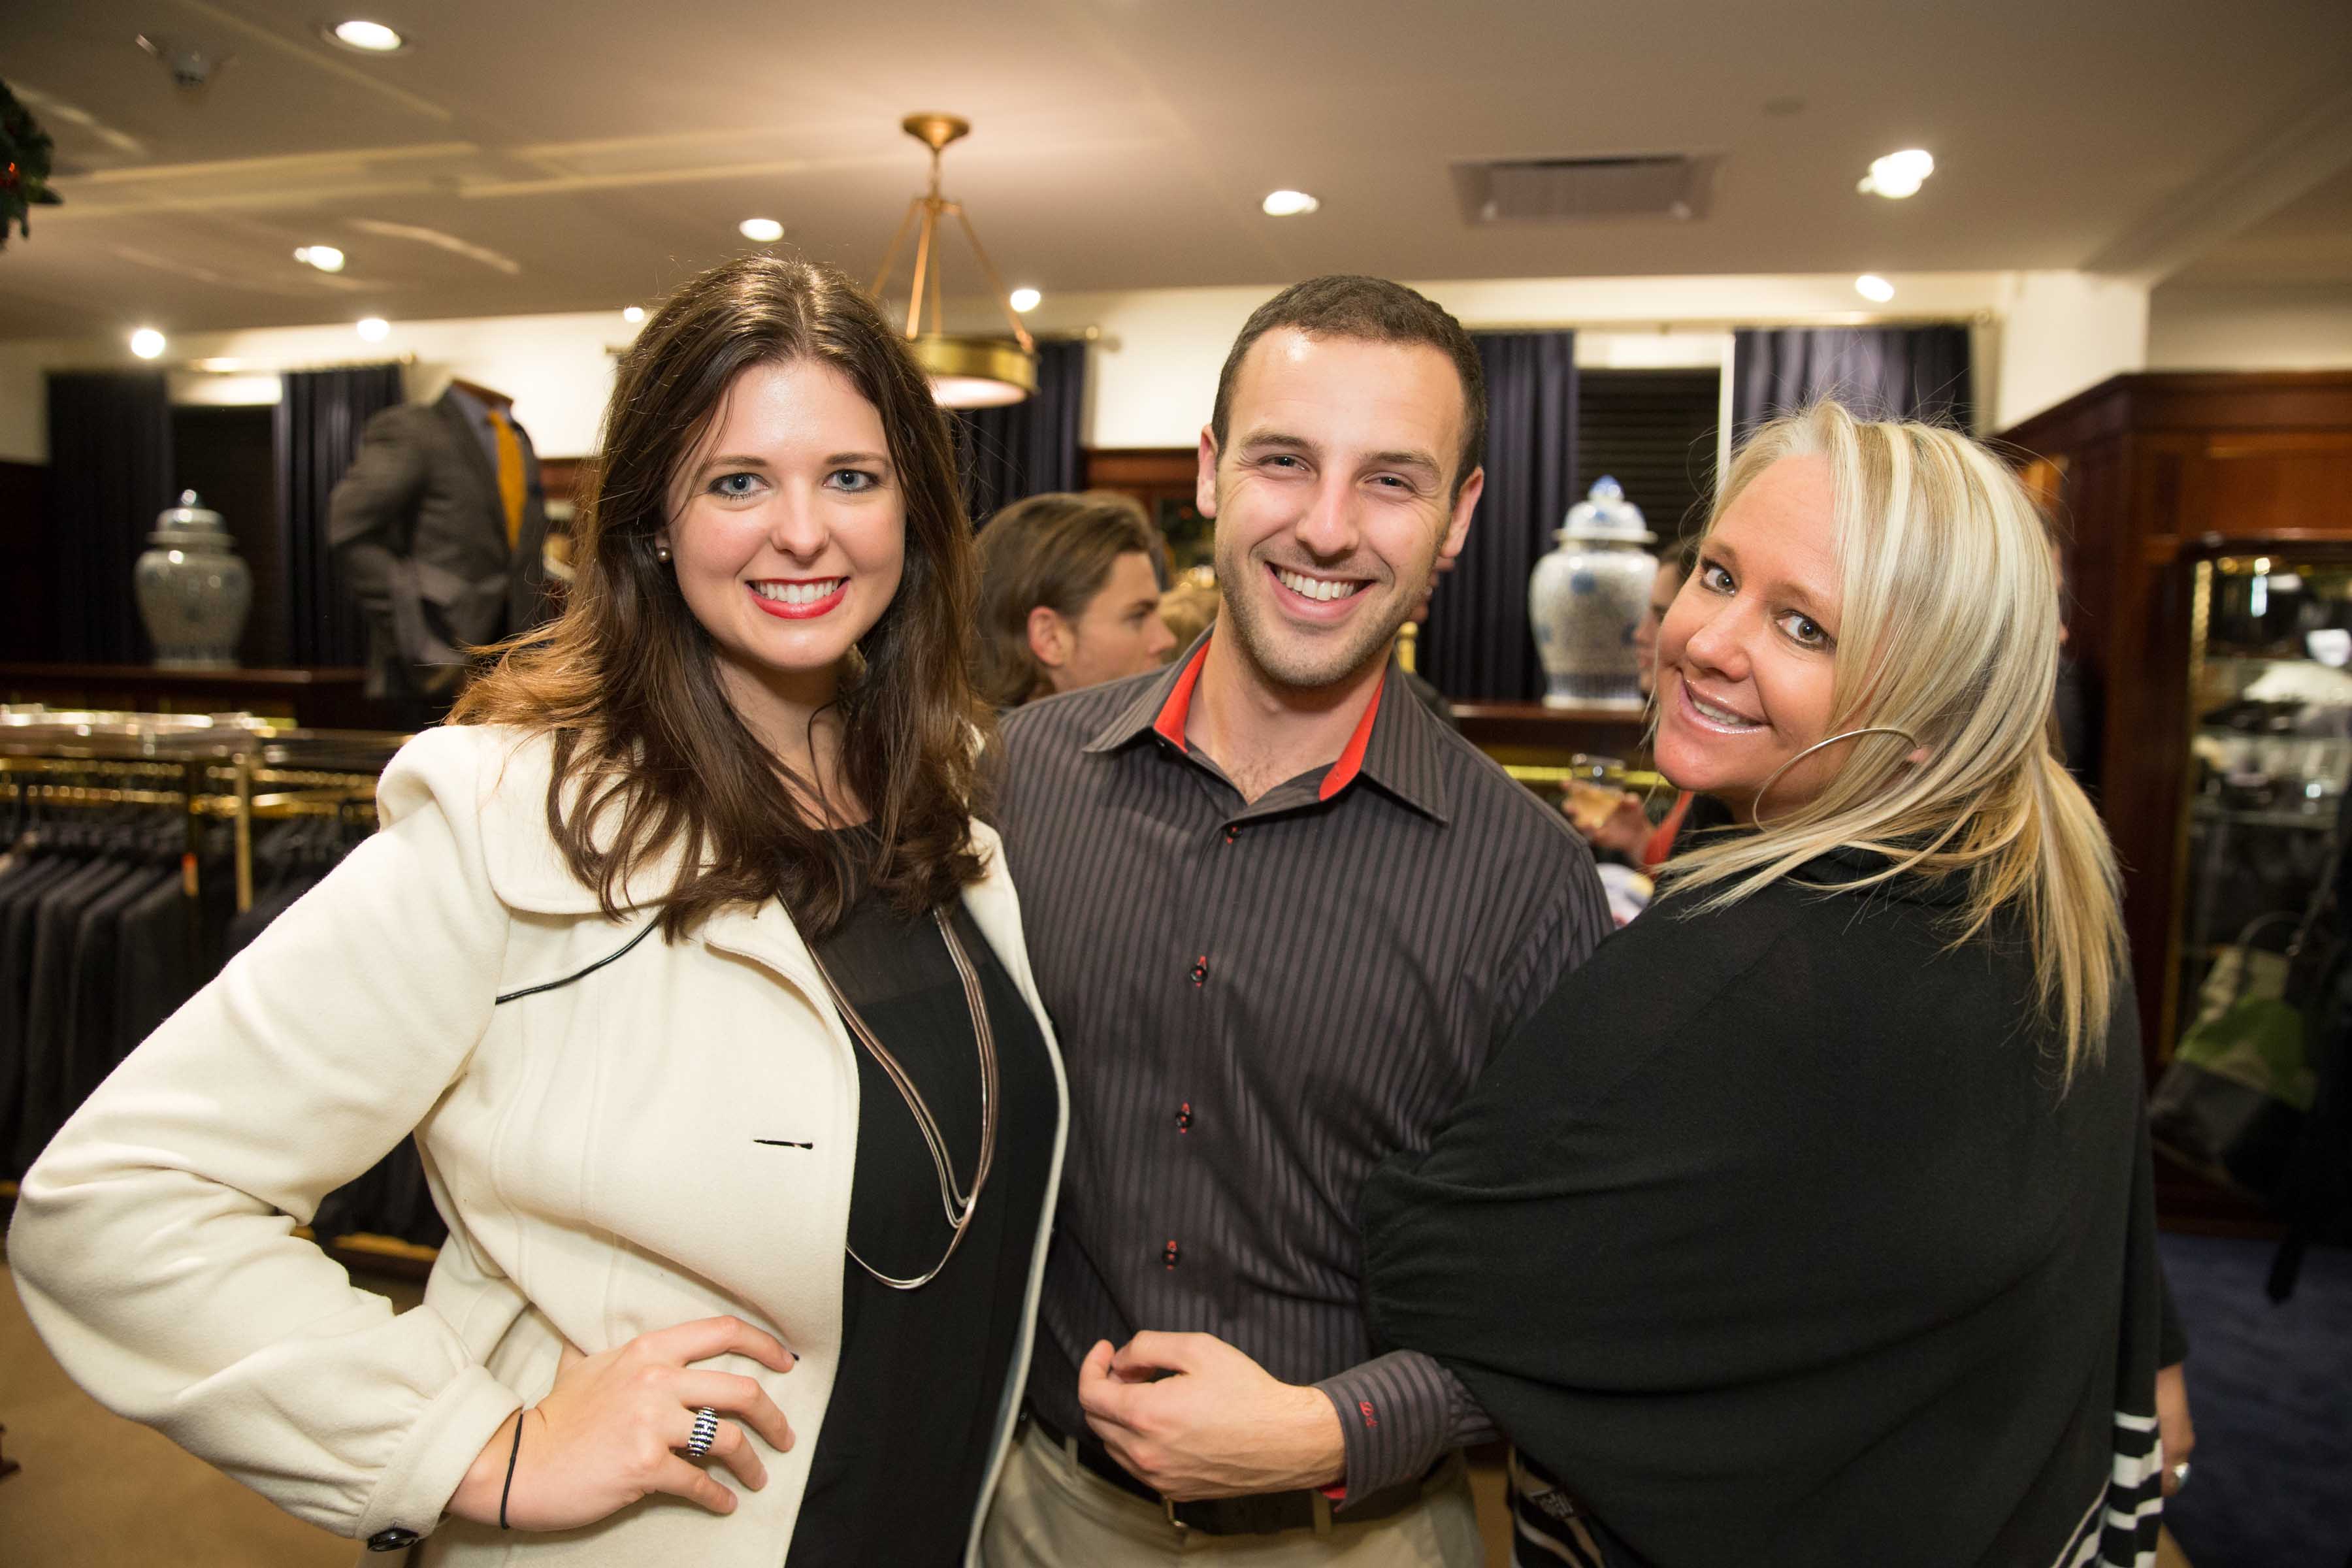 Brook Brothers' Holiday Celebration Benefiting St. Jude Children's Research Hospital